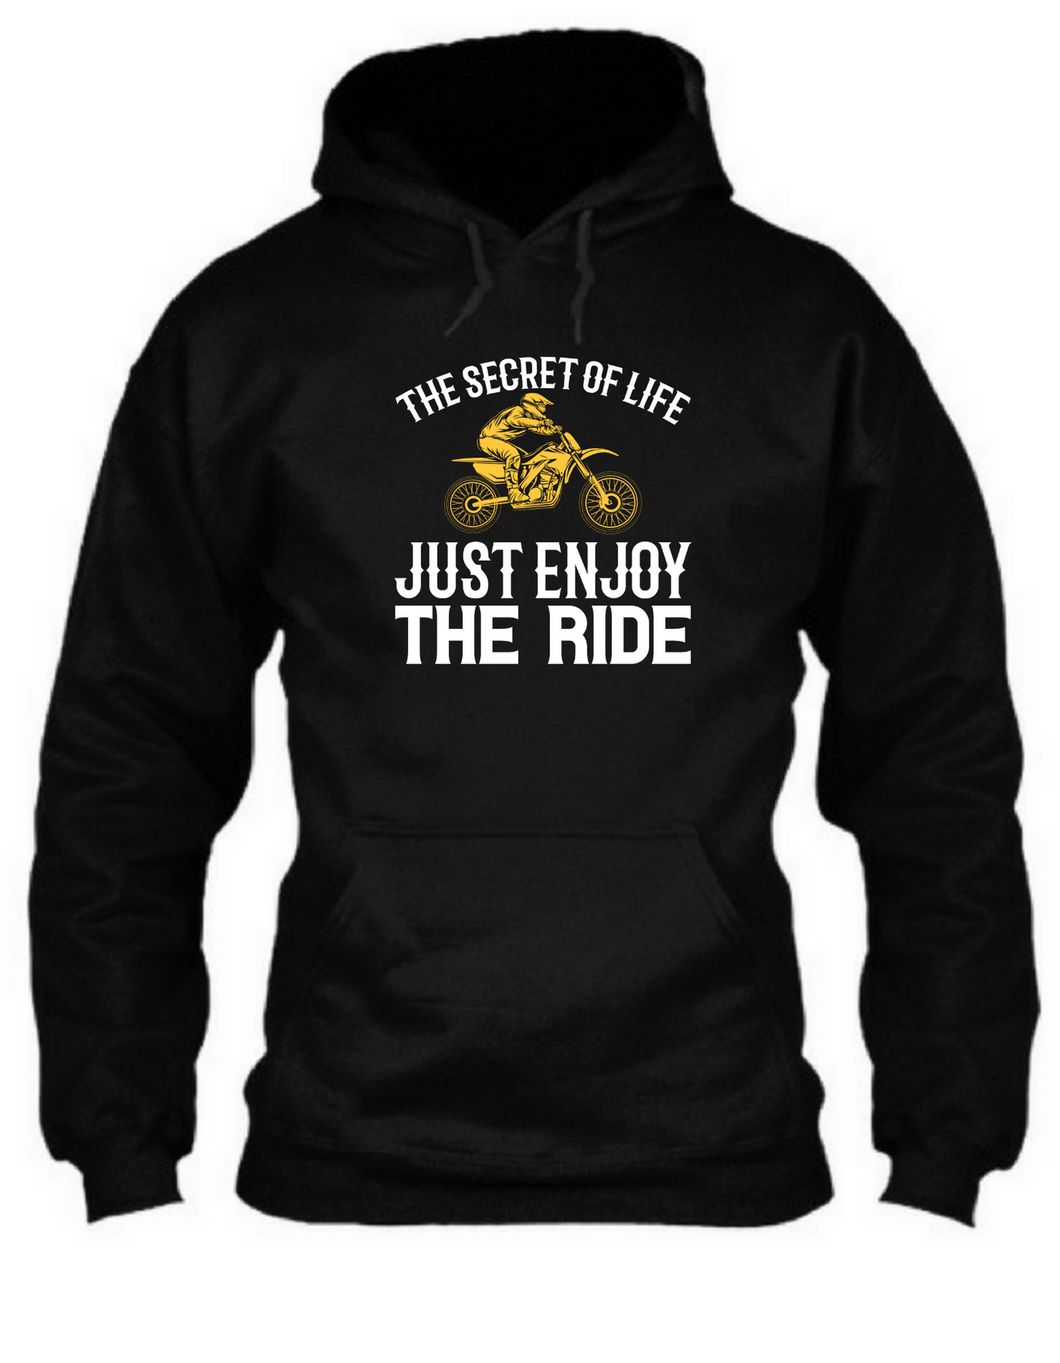 The secret of life just enjoy the ride - Unisex Hoodie